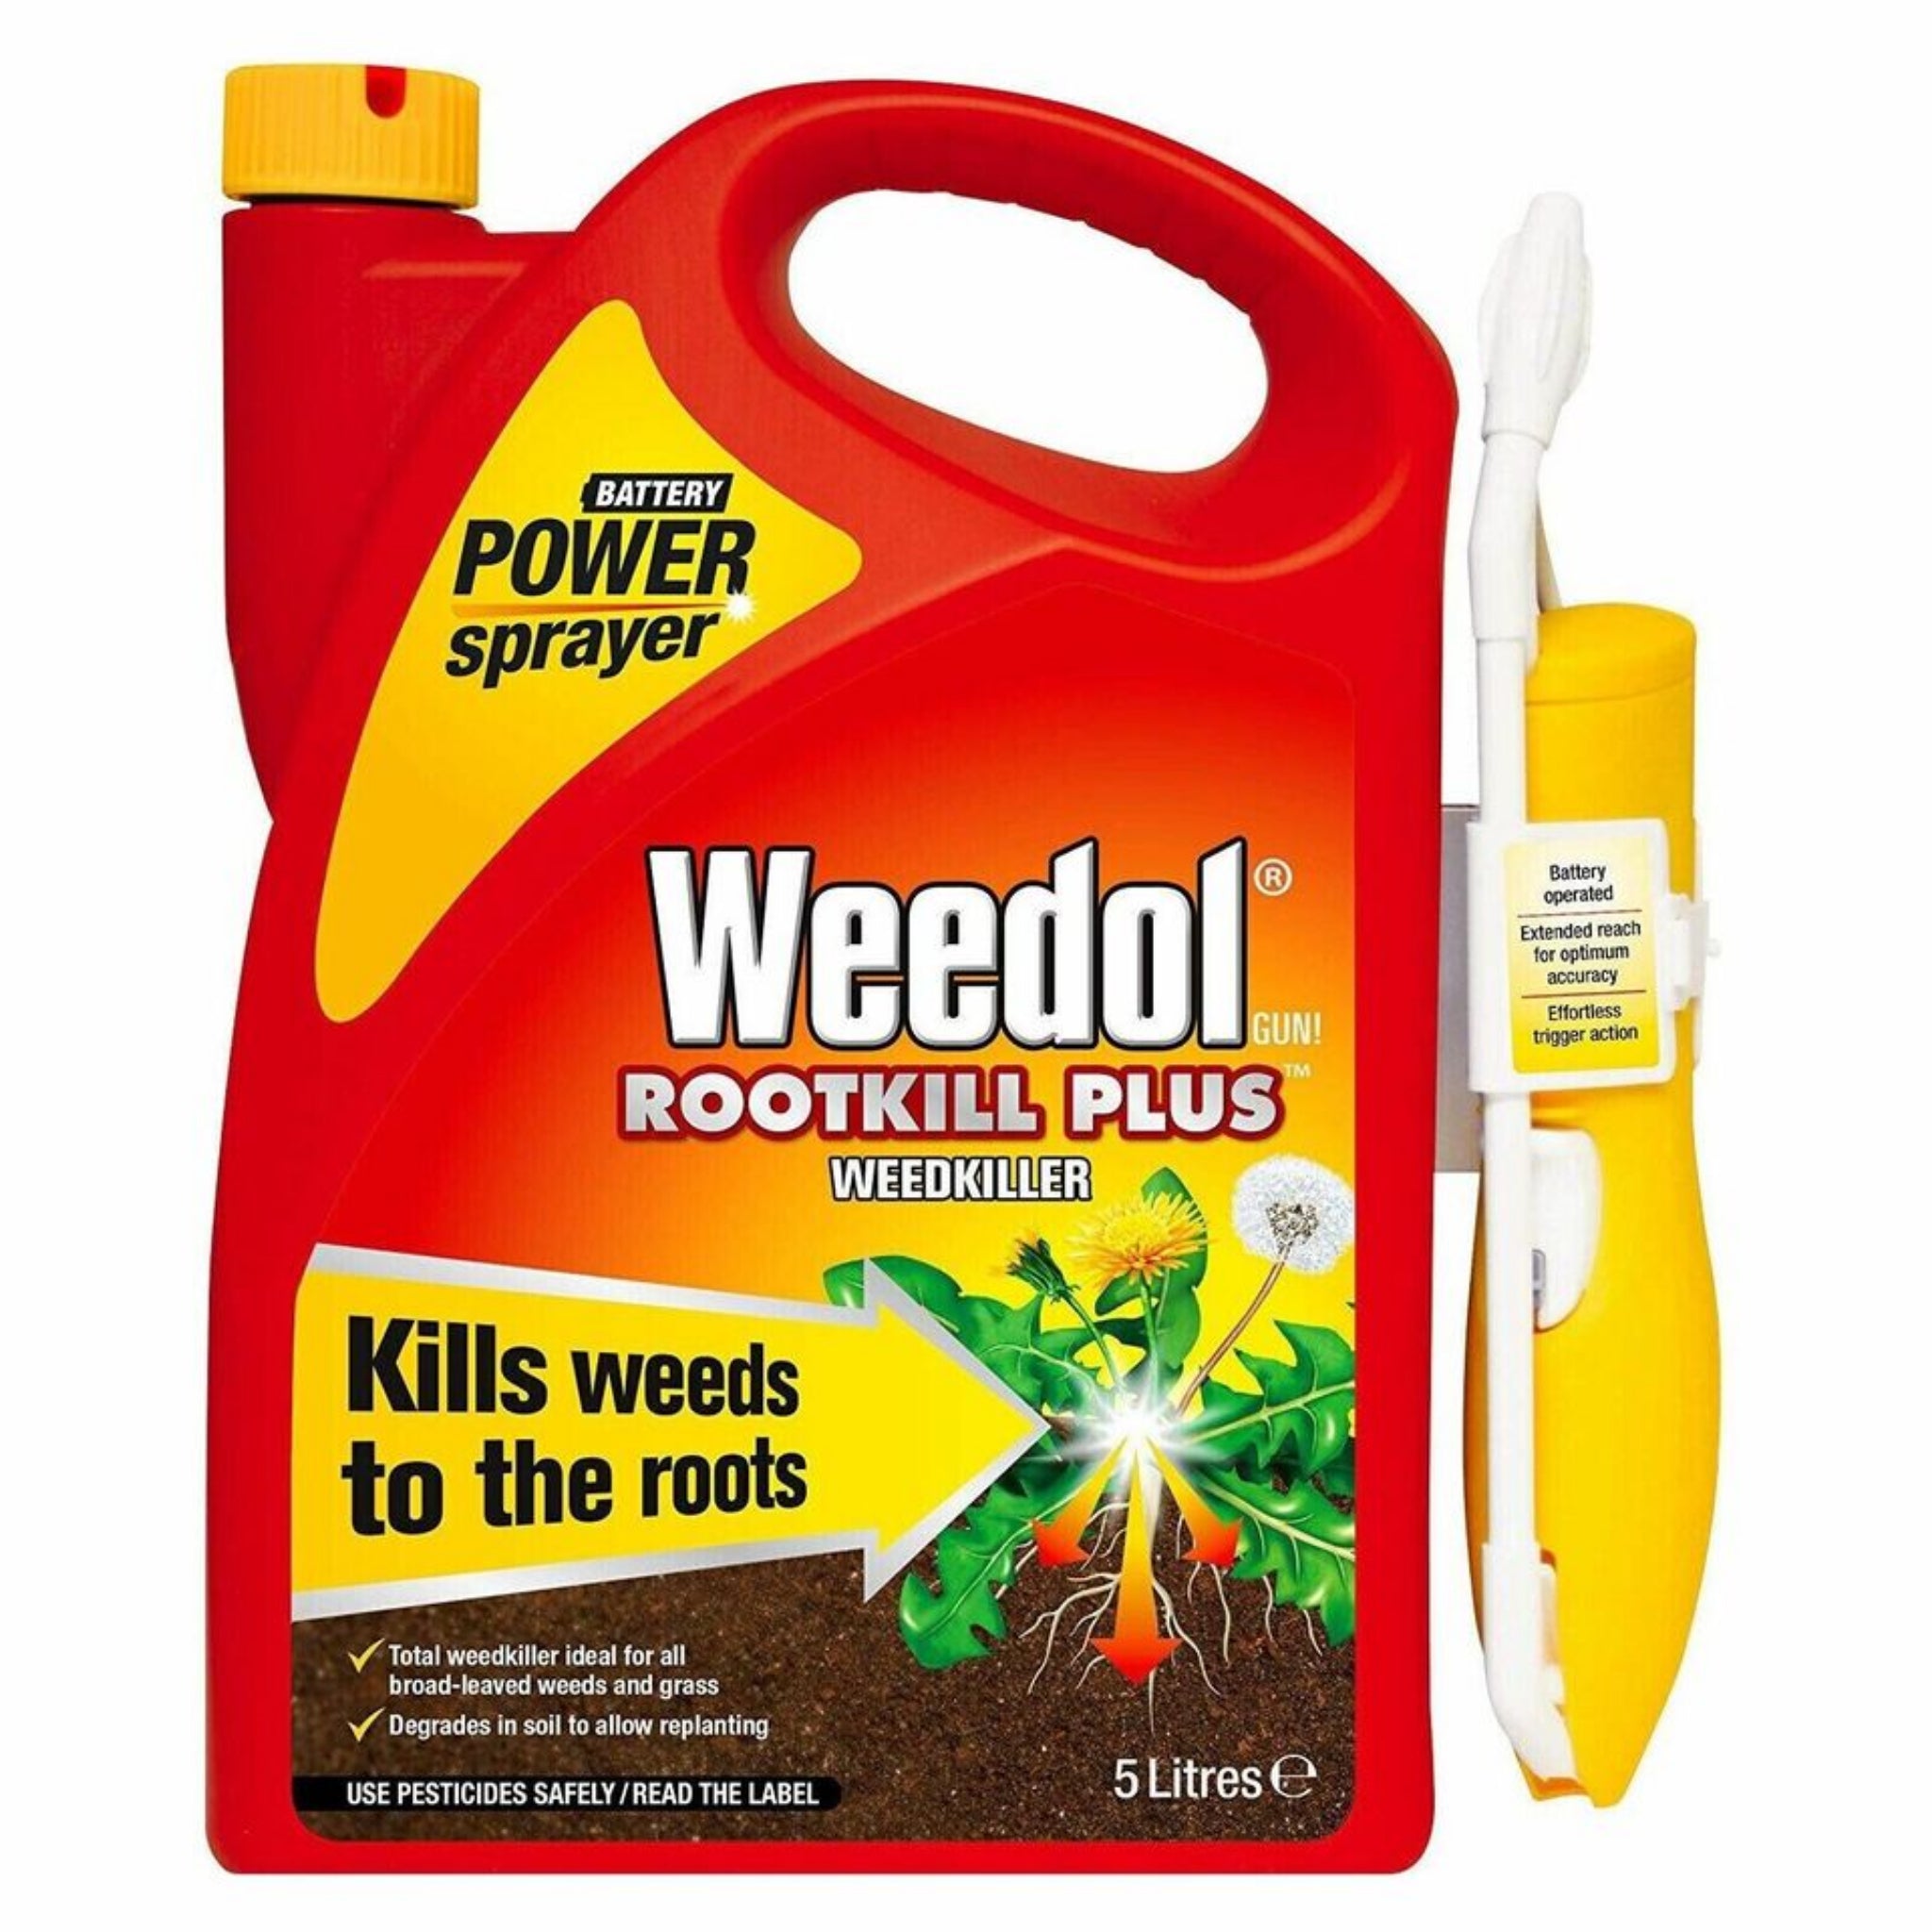 Beclen Harp Weedol Rootkill Plus Battery Operated Power Sprayer Ready To Use Weedkiller - 5L